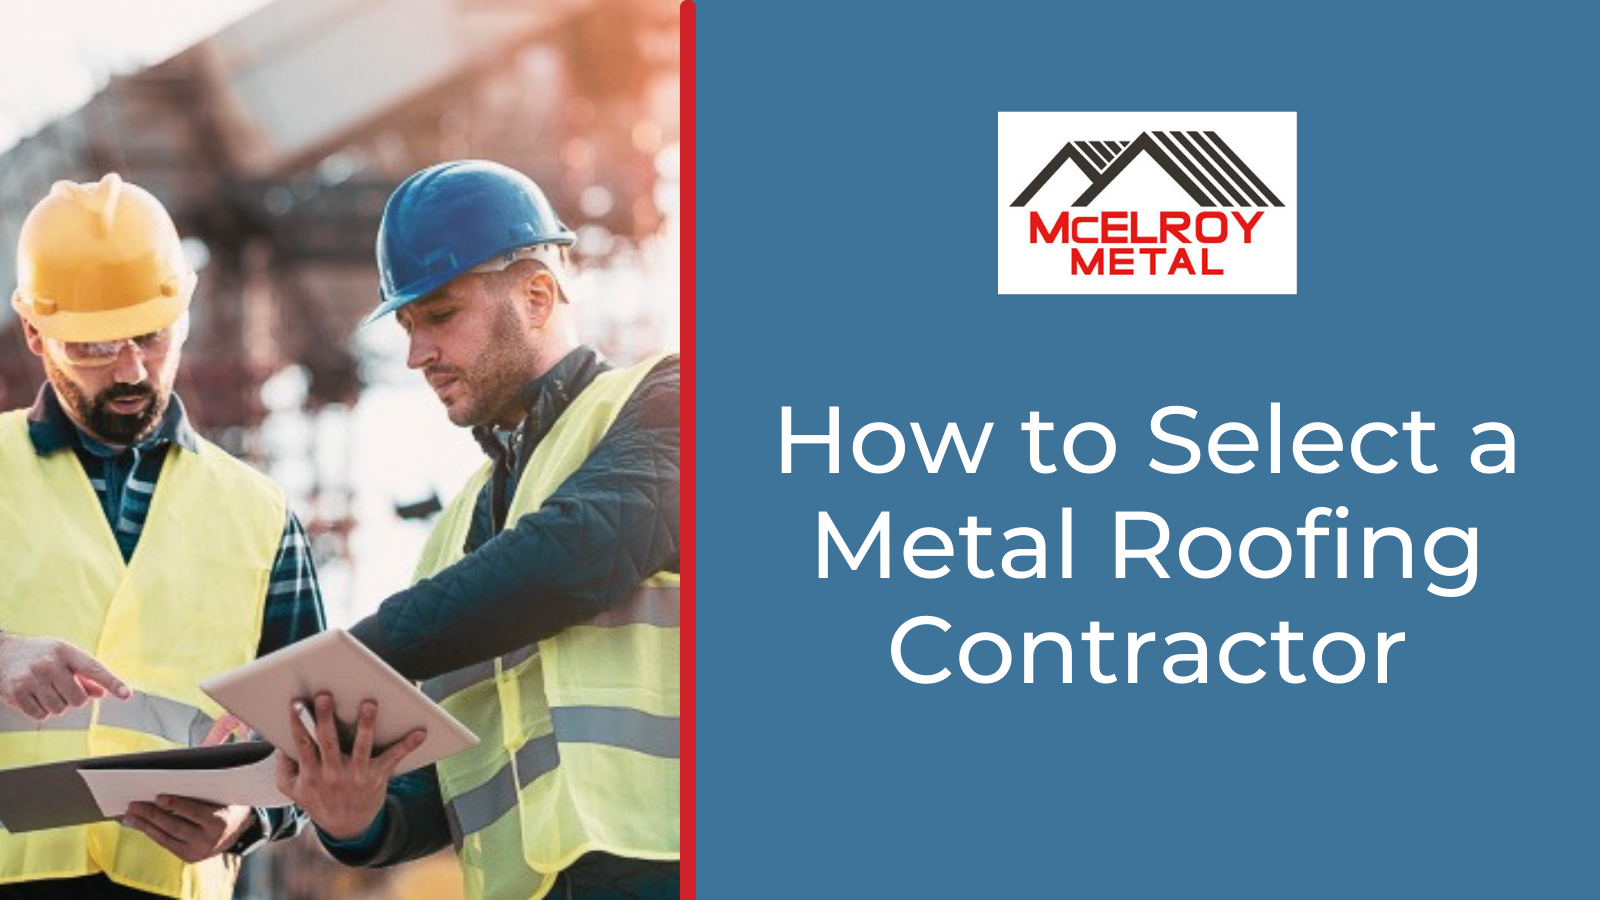 How to select a metal roofing contractor